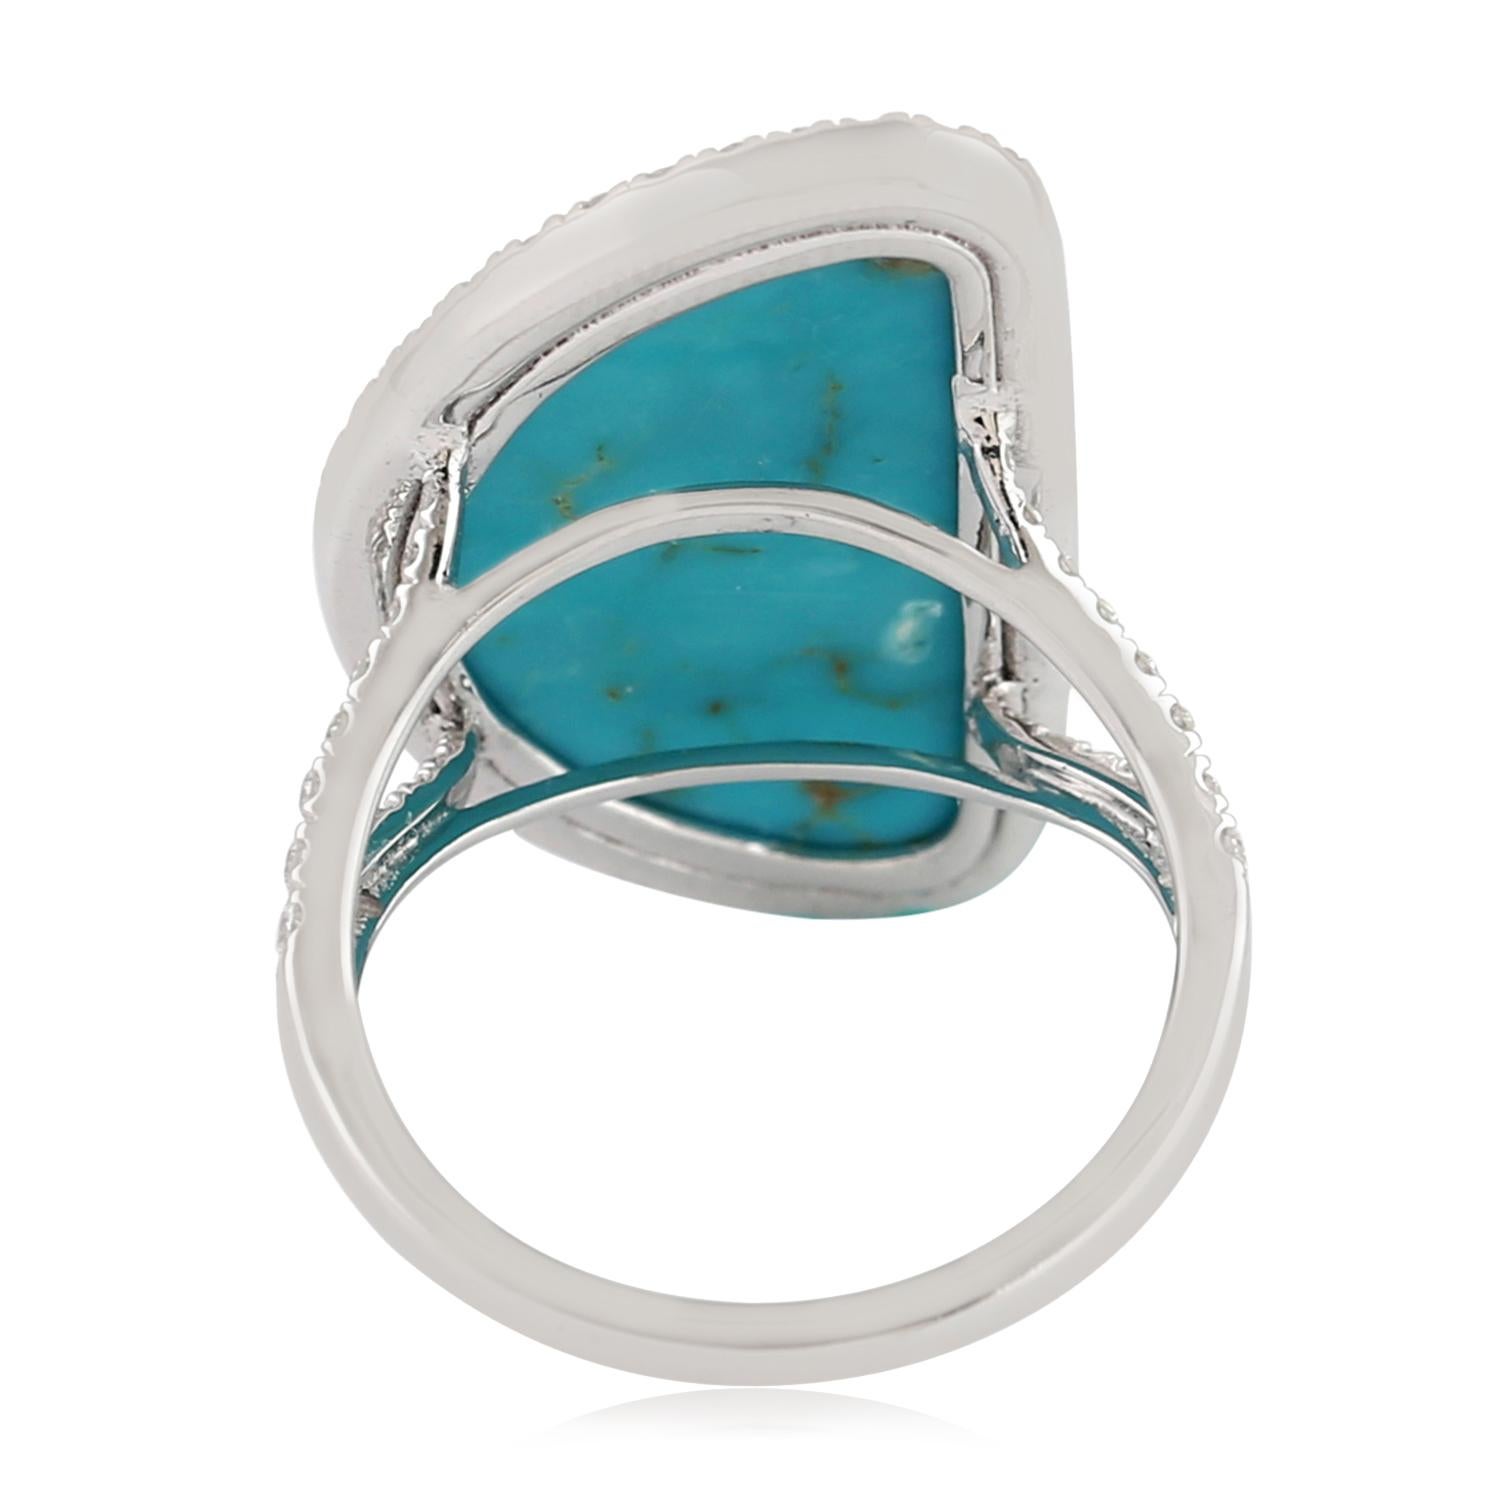 Artisan 7.60ct Natural Turquoise Cocktail Ring With Diamonds Made In 18k White Gold For Sale